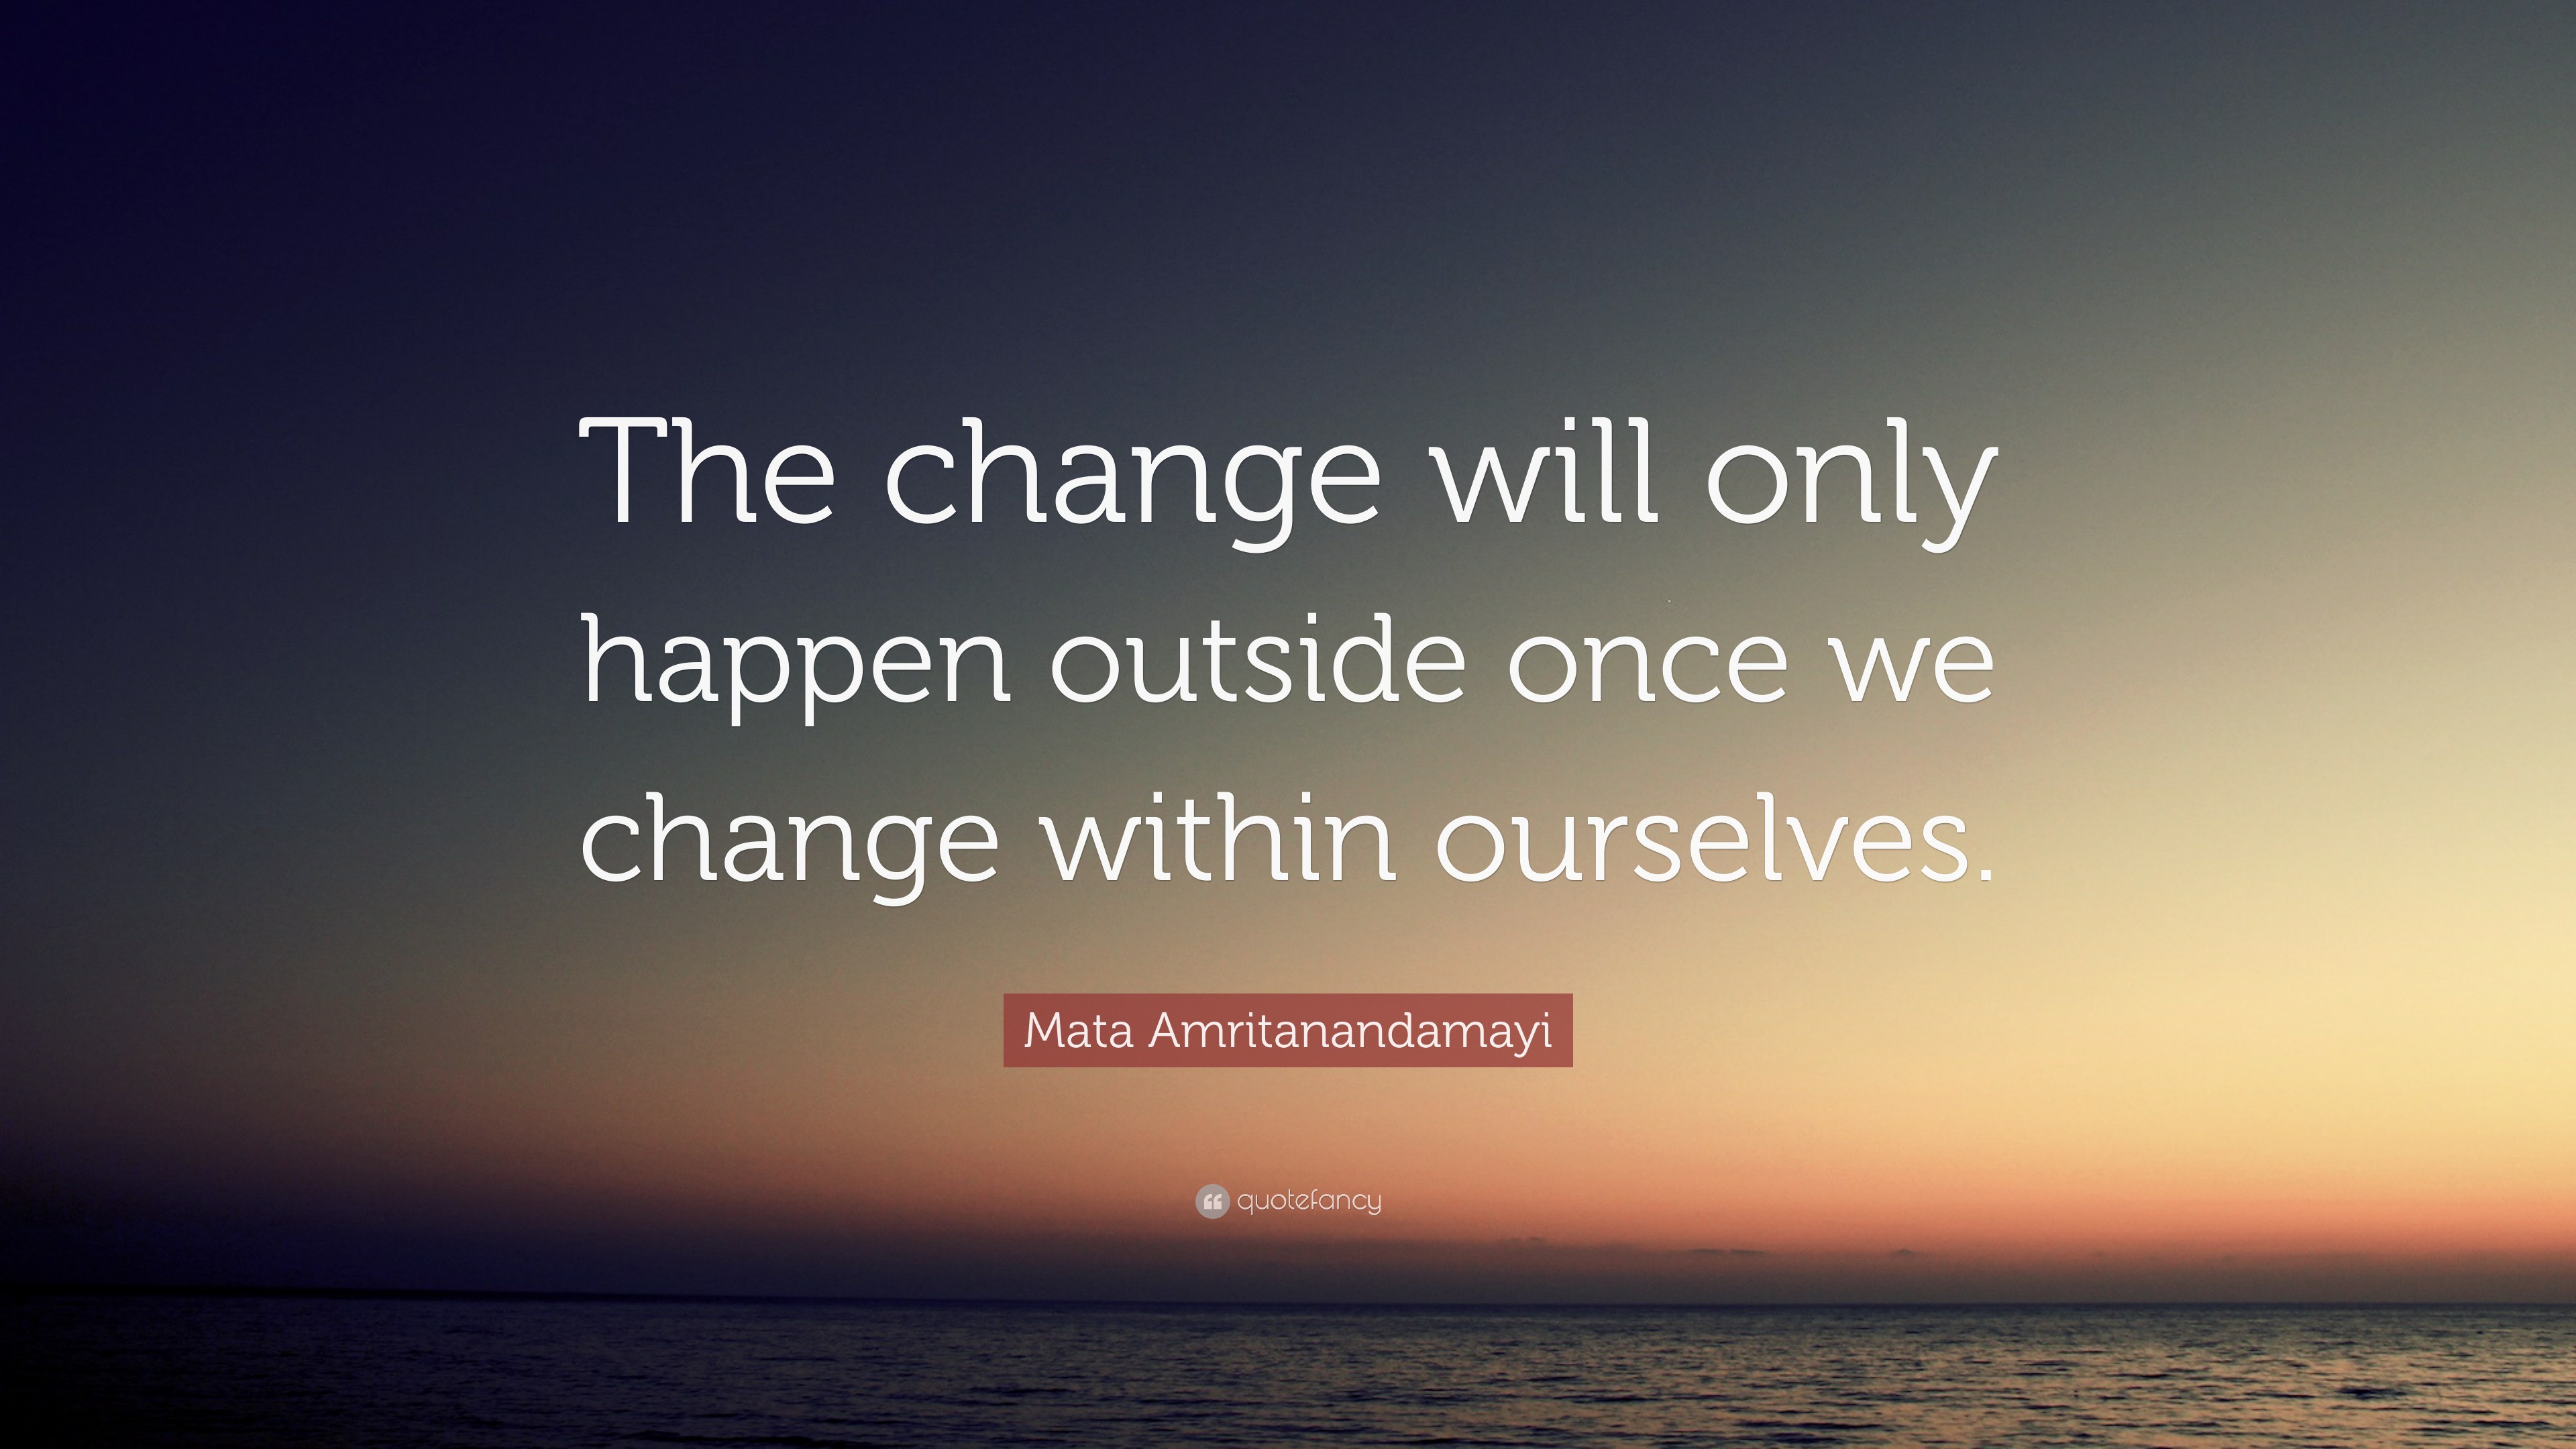 Mata Amritanandamayi Quote: “The change will only happen outside once ...